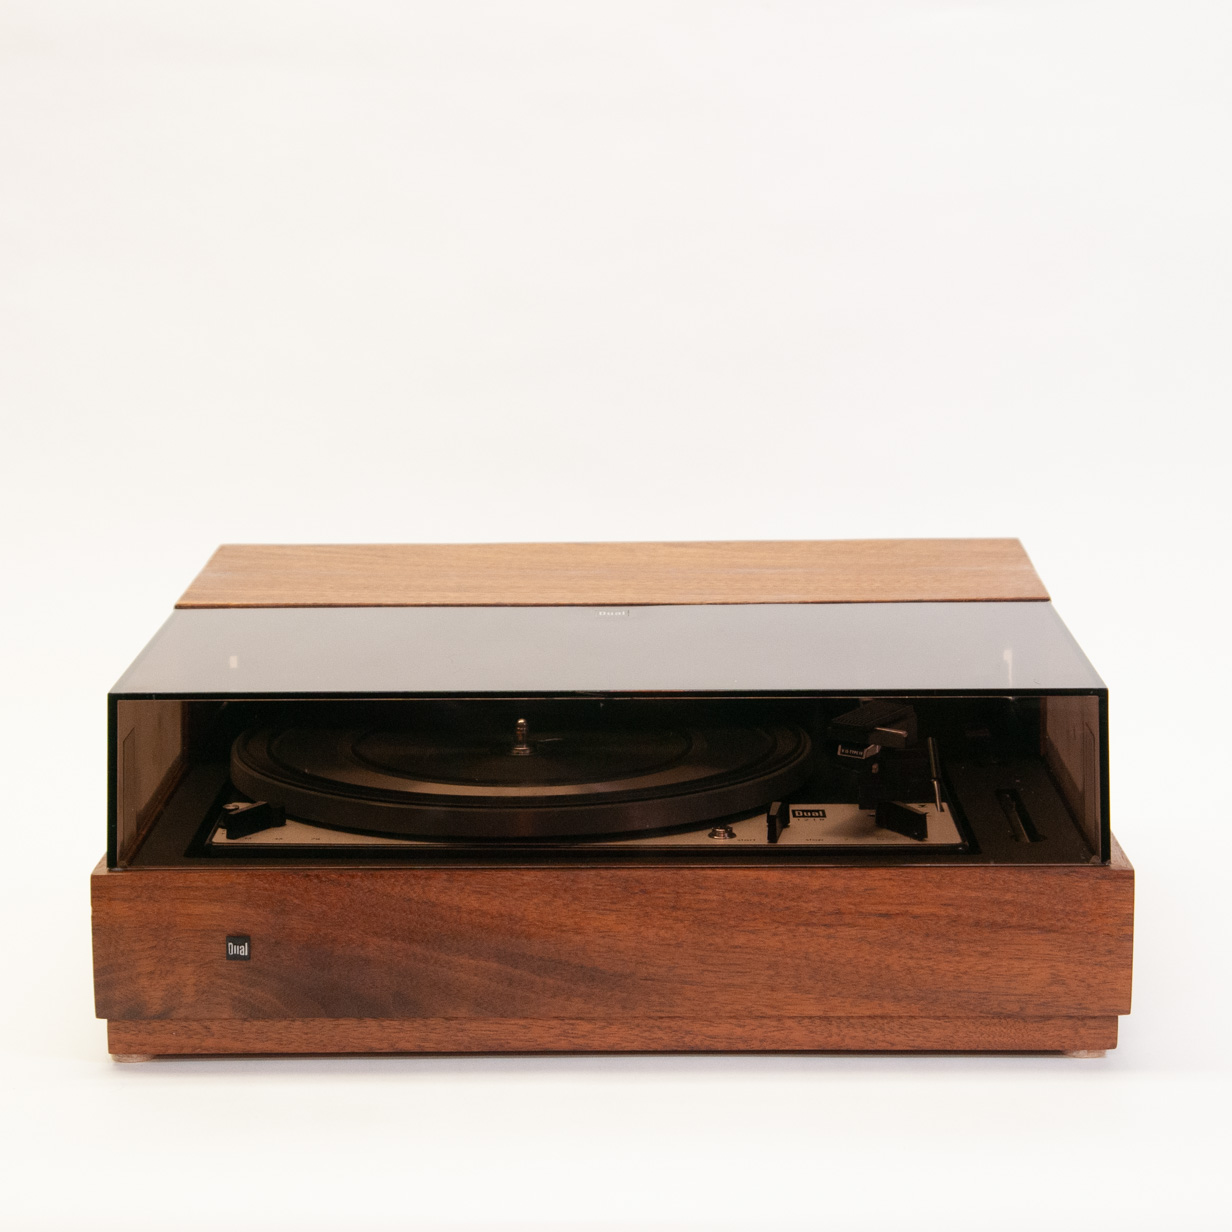 Dual turntable, front view with dustcover closed